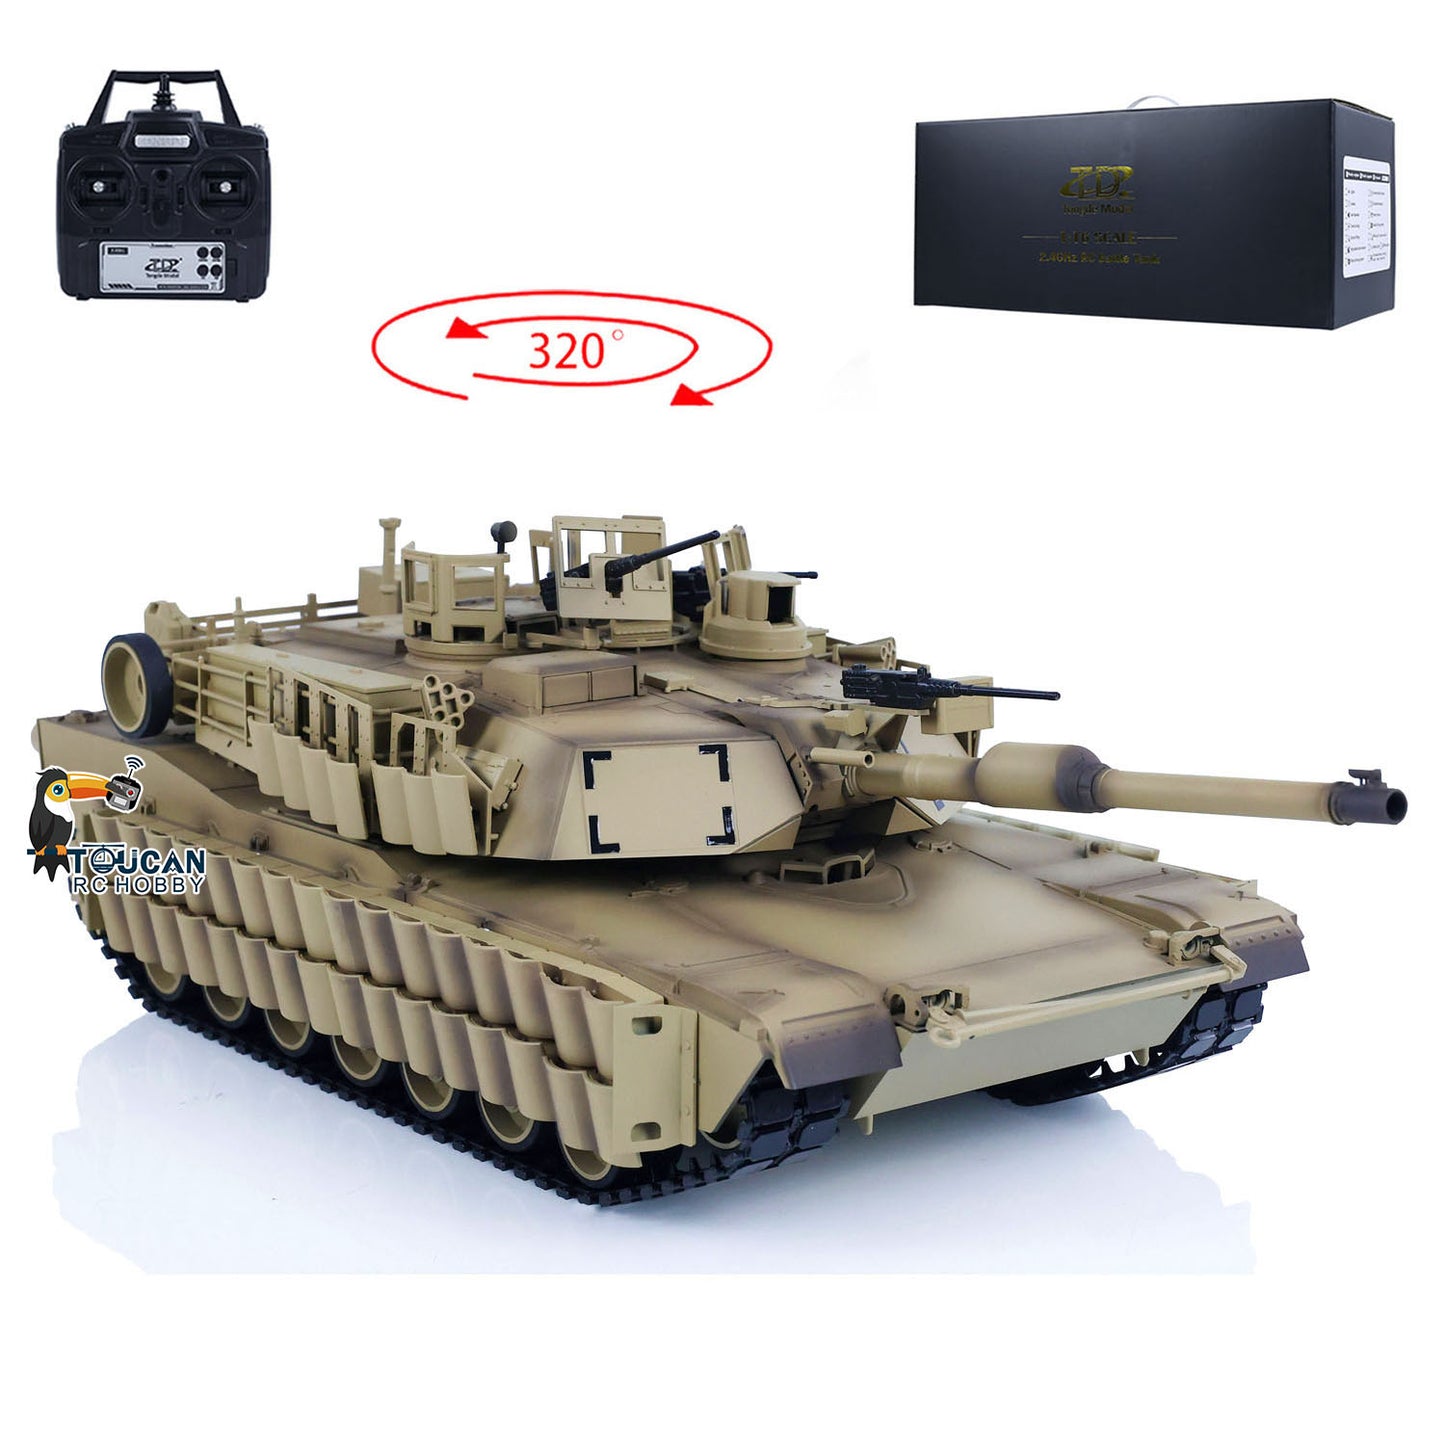 IN STOCK Tongde 1/16 Abrams M1A2 RC Infrared Battle Tank SEP TUSK II Remote Controlled Electric Panzer Hobby Model 320 DIY